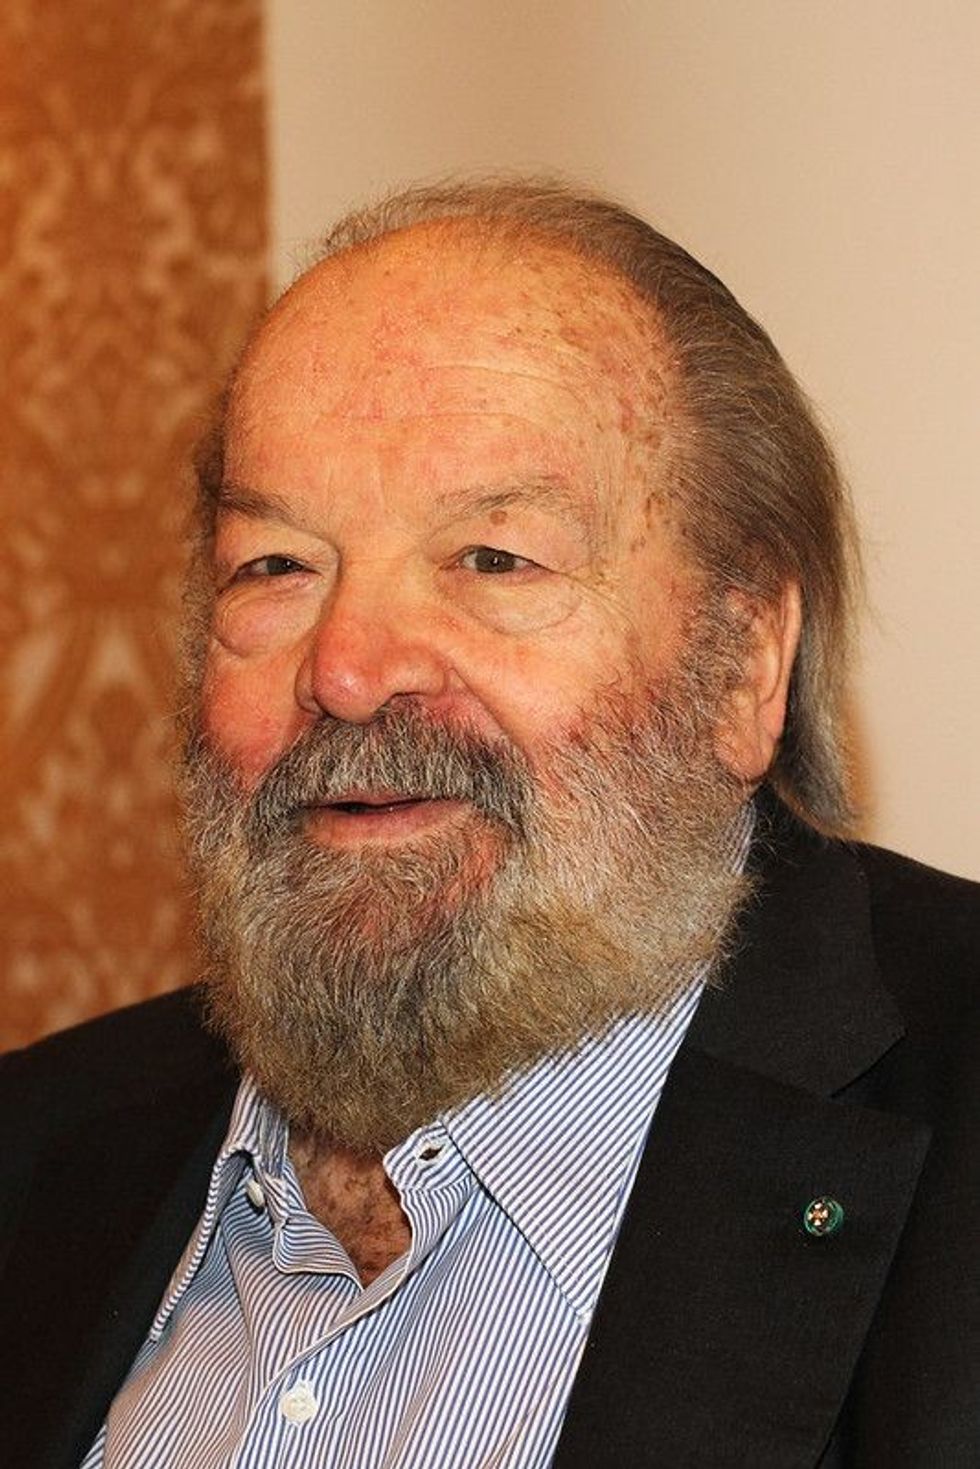 Bud Spencer has collaborated with Terence Hill in several Italo-Western movies.